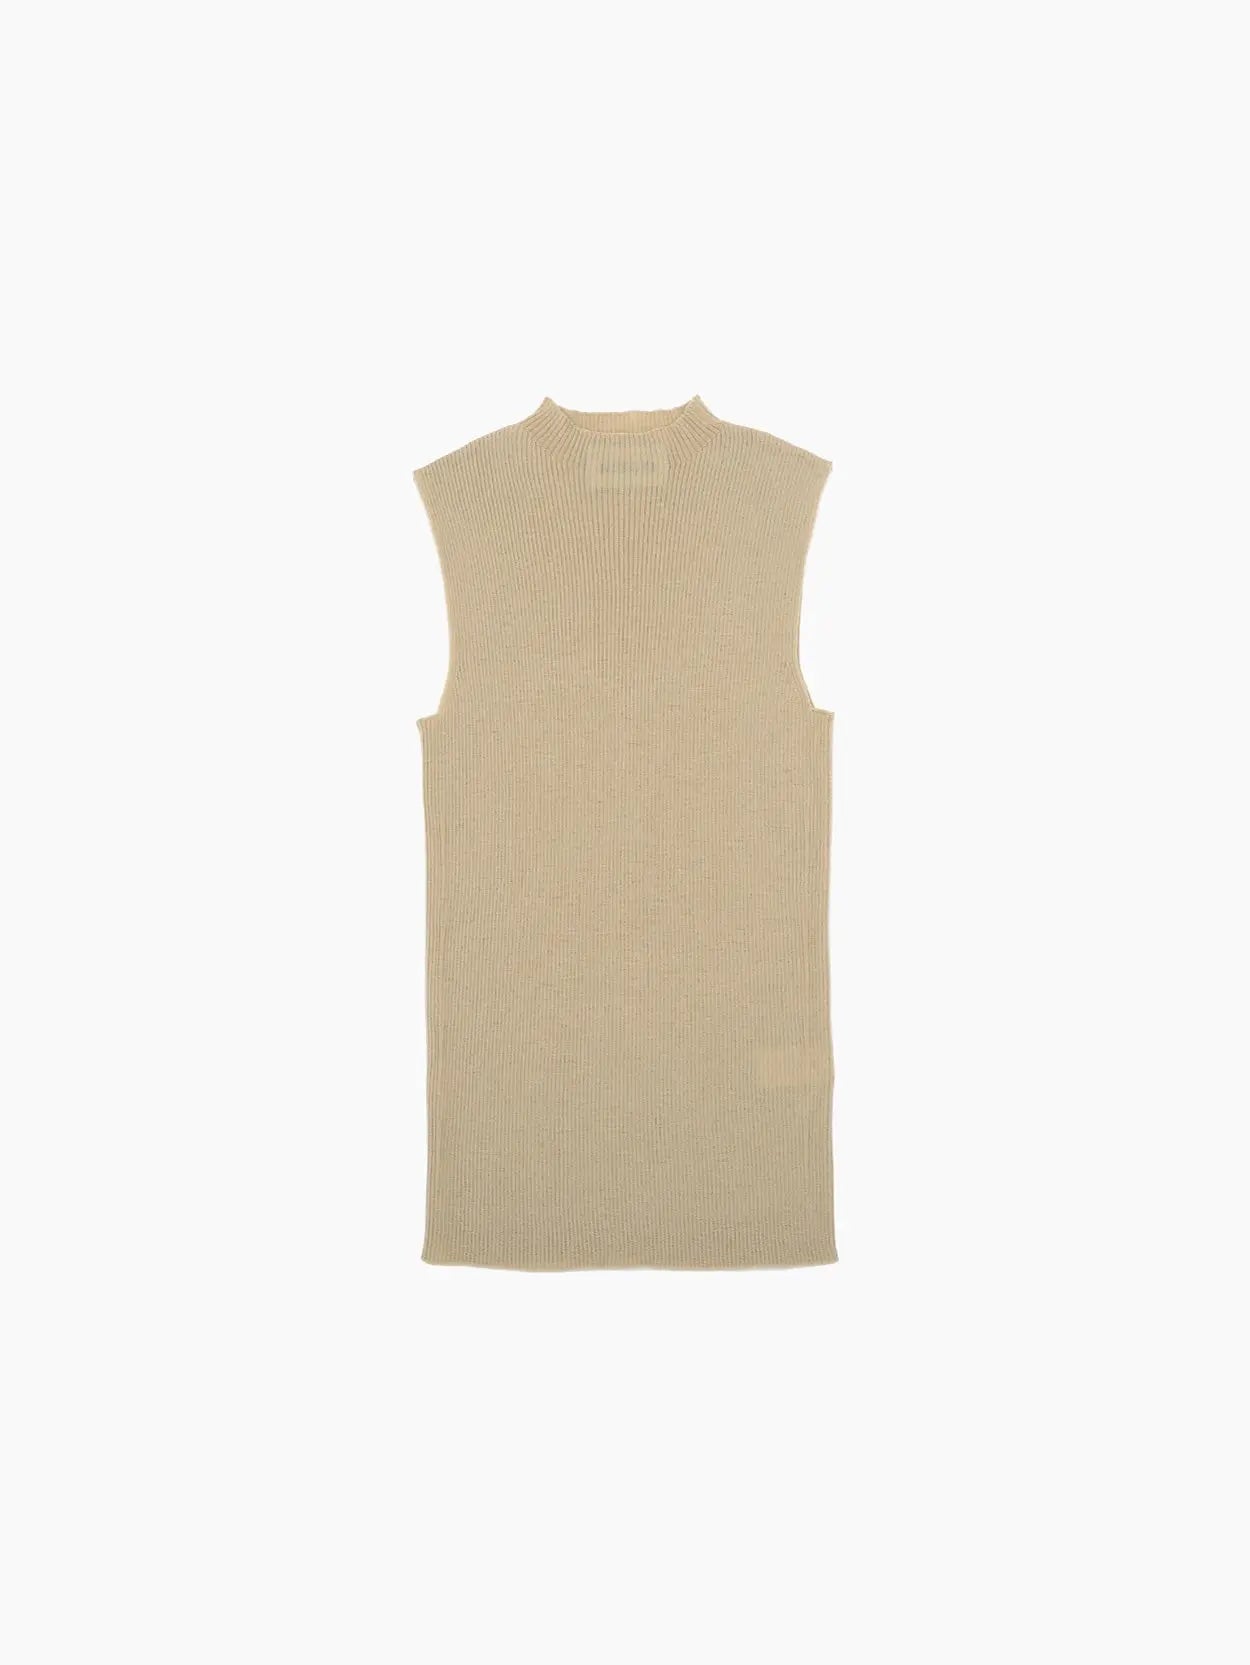 A sleeveless, ribbed-knit beige top with a high, rounded neckline. The Matte Top Cream from Bielo extends to a mid-length and has a simplistic, minimalistic design. The background is plain white.